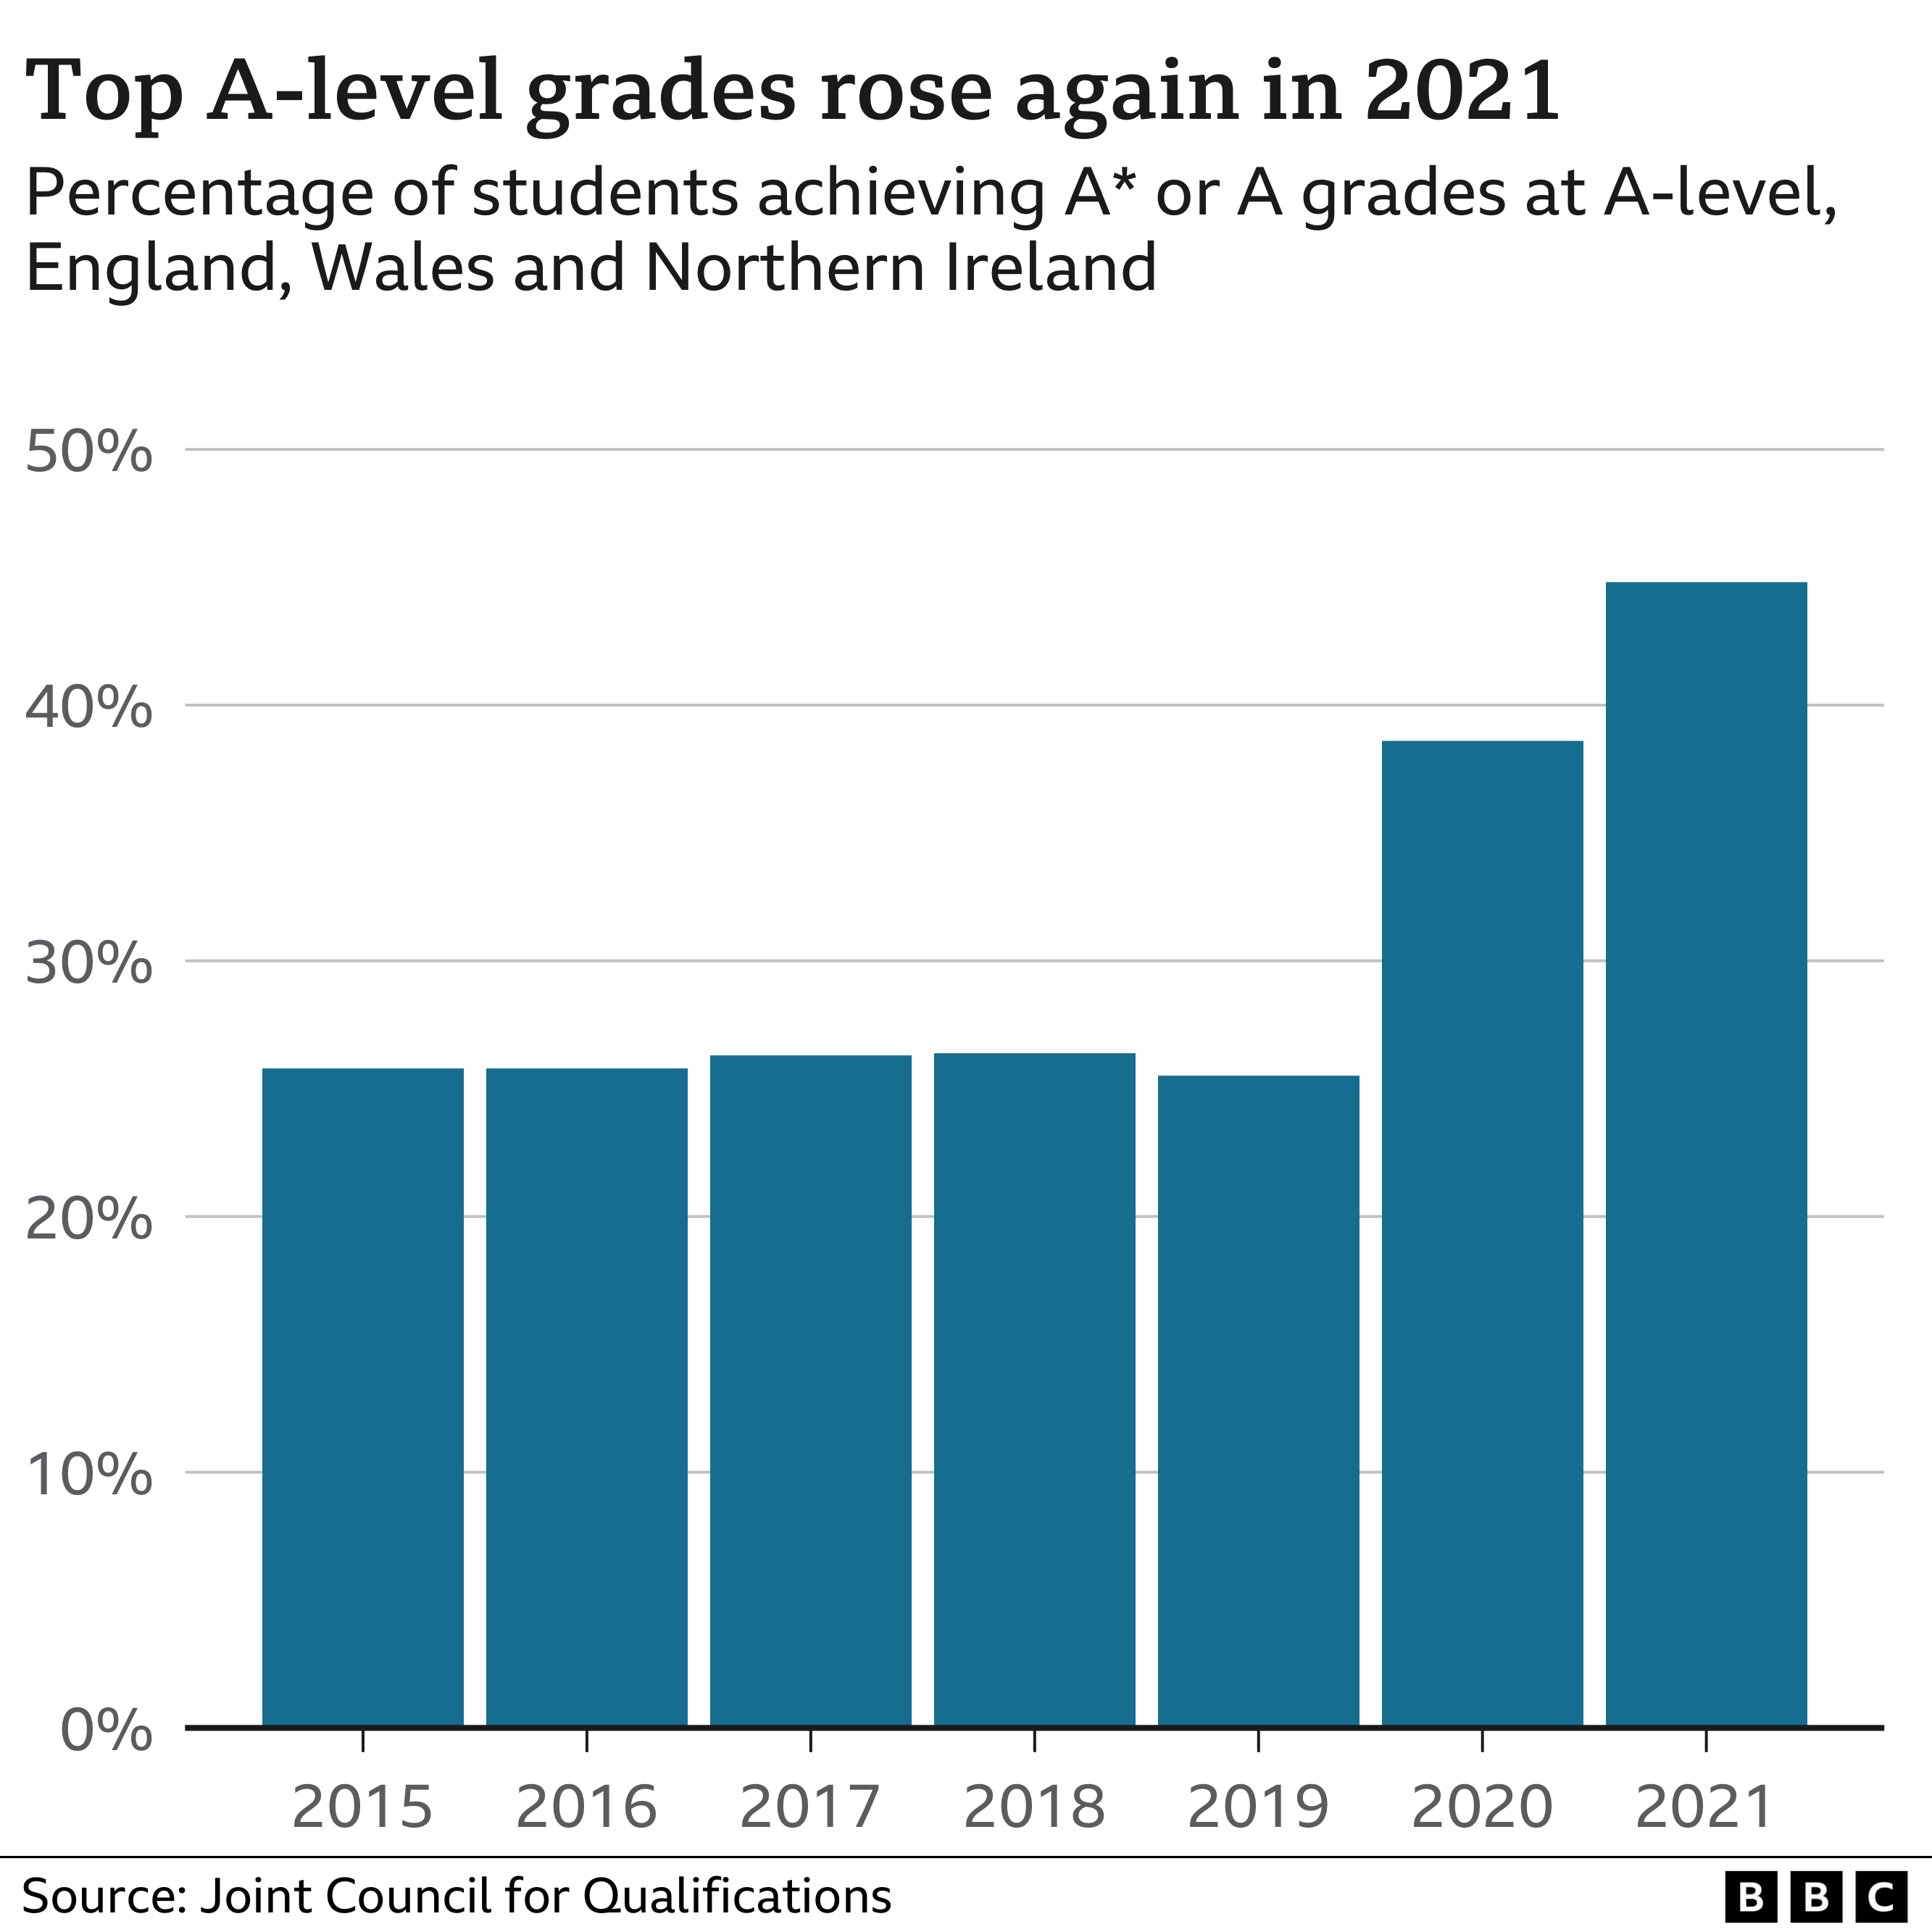 Chart showing that top A-level grades rose again in 2021